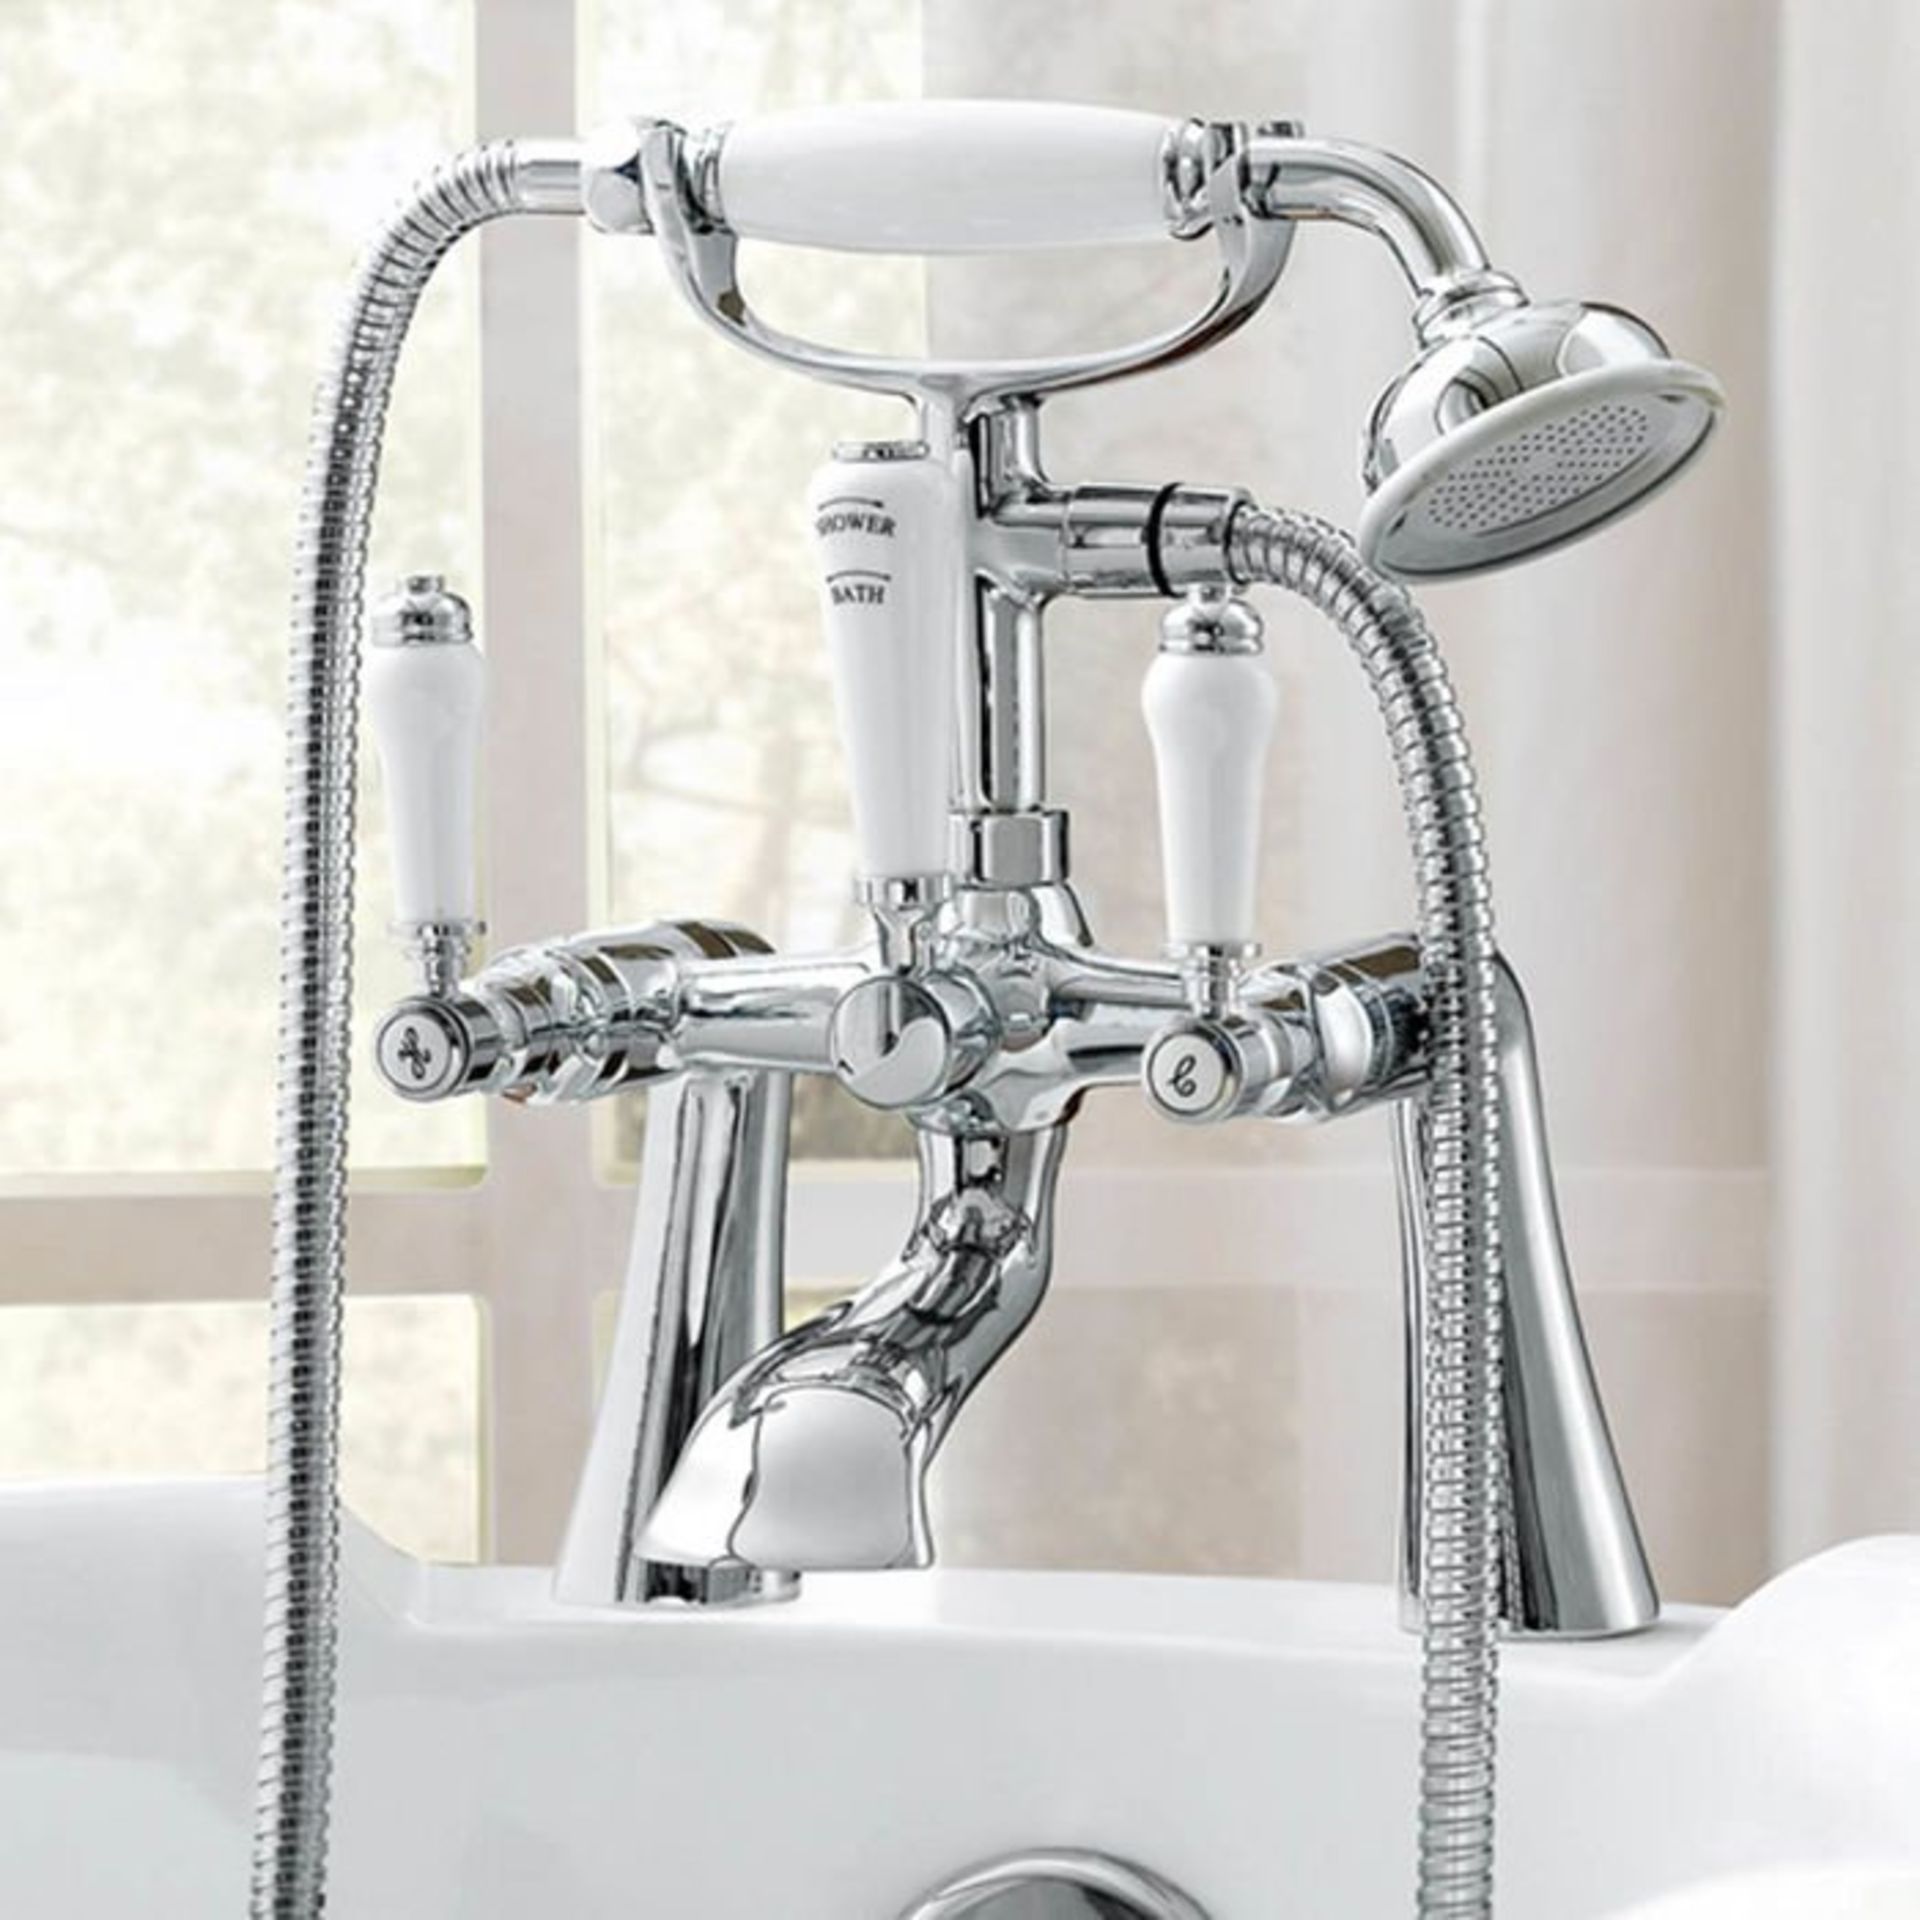 (H28) Regal Chrome Traditional Bath Mixer Lever Tap with Hand Held Shower RRP £179.99 Chrome